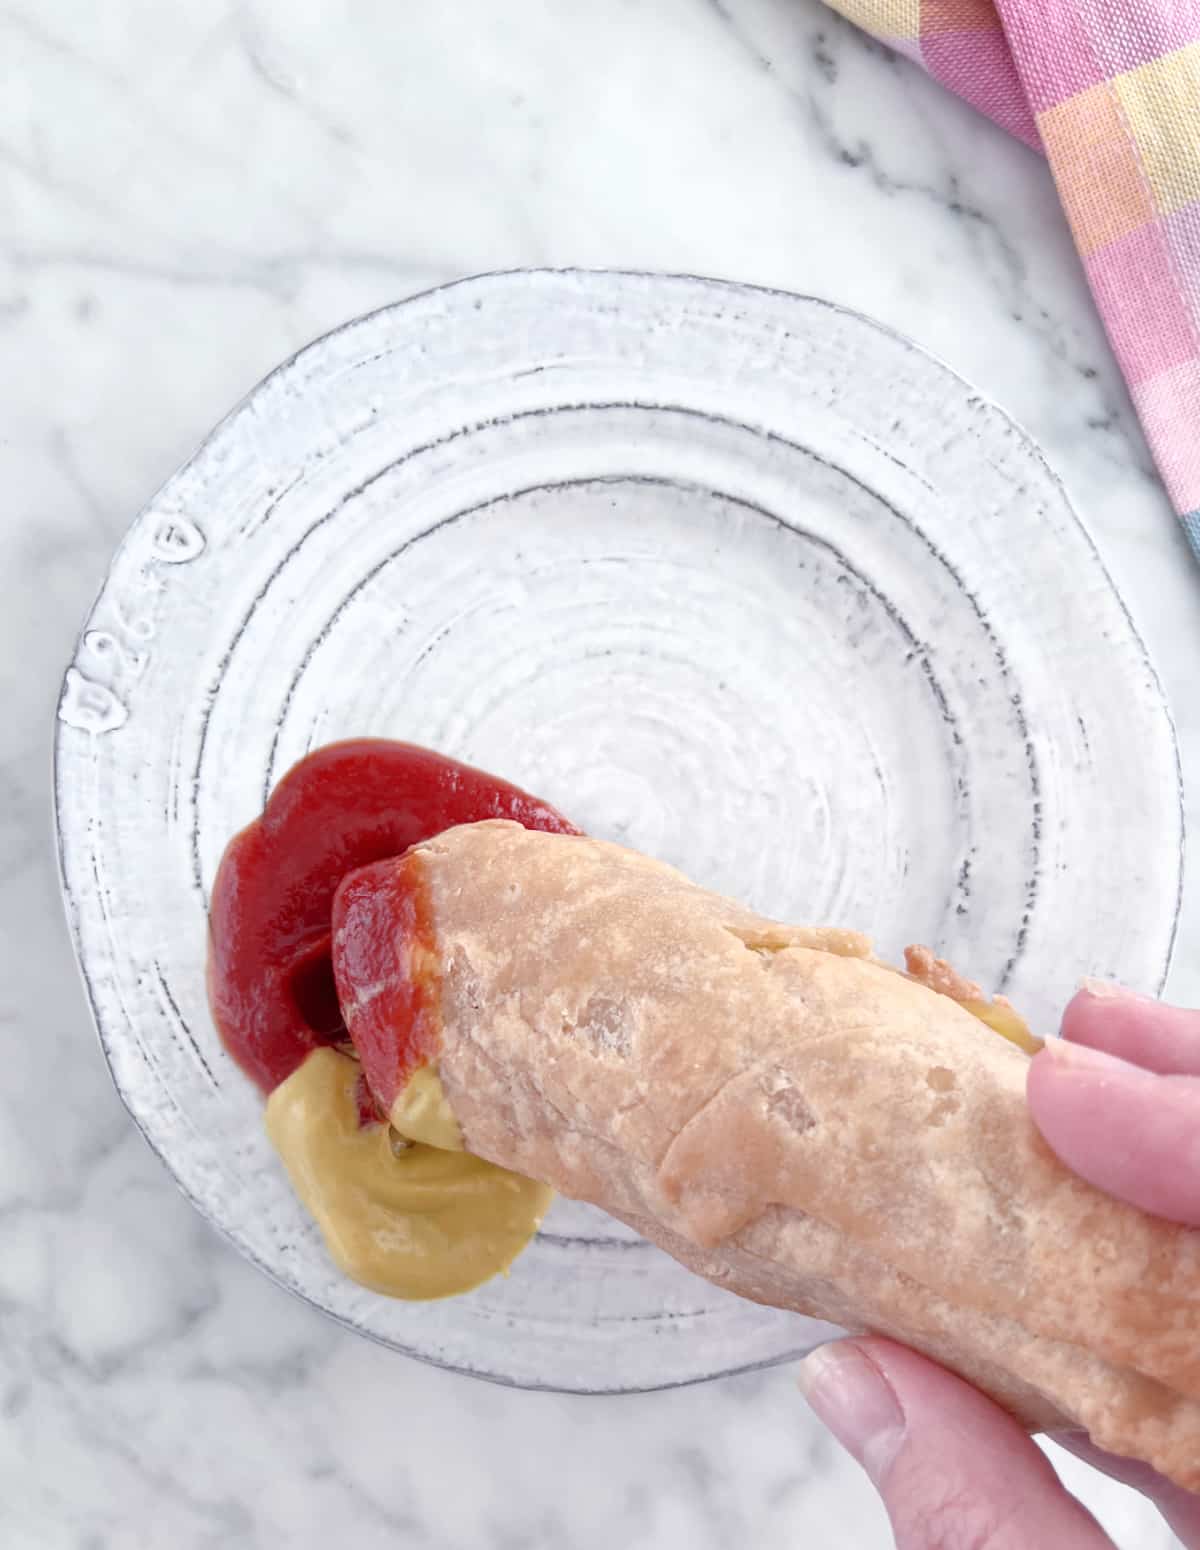 A hand dipping a wiener wrap (a hot dog with cheese wrapped in pastry and baked) in ketchup and mustard. Sitting on a white marble table with a pastel plaid cloth napkin.